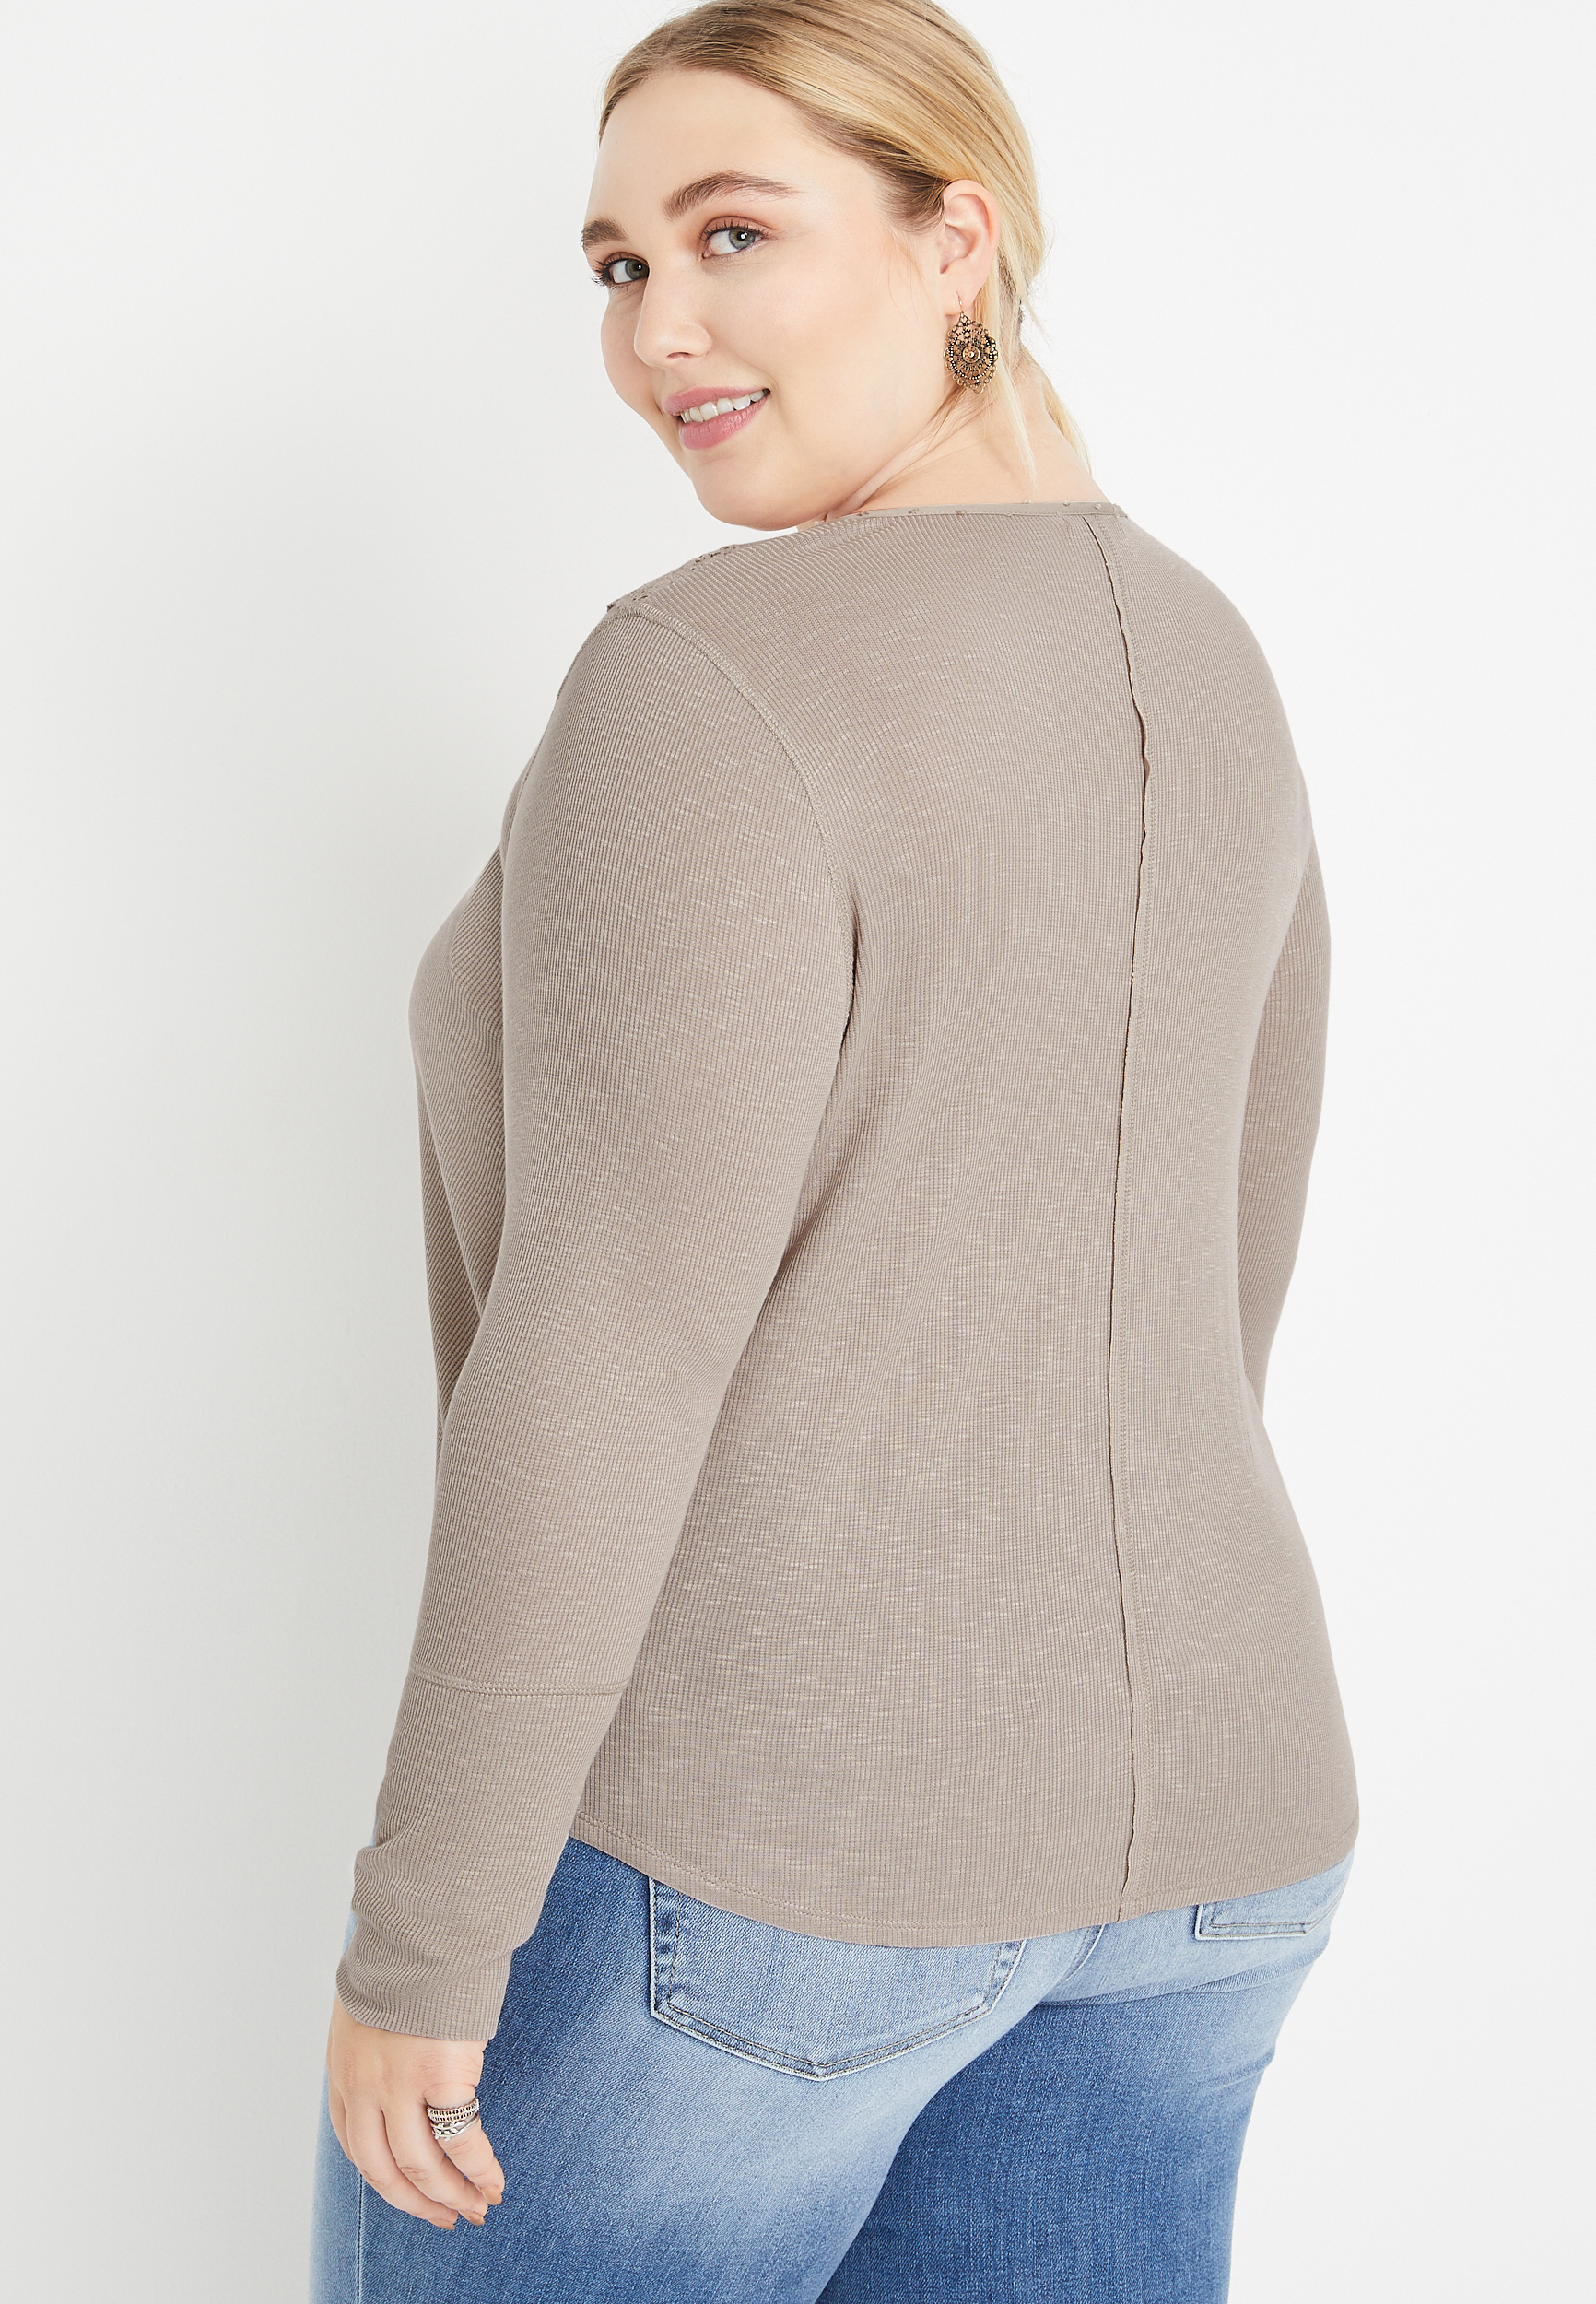 Plus Size Solid Lace Long Sleeve Henley Top